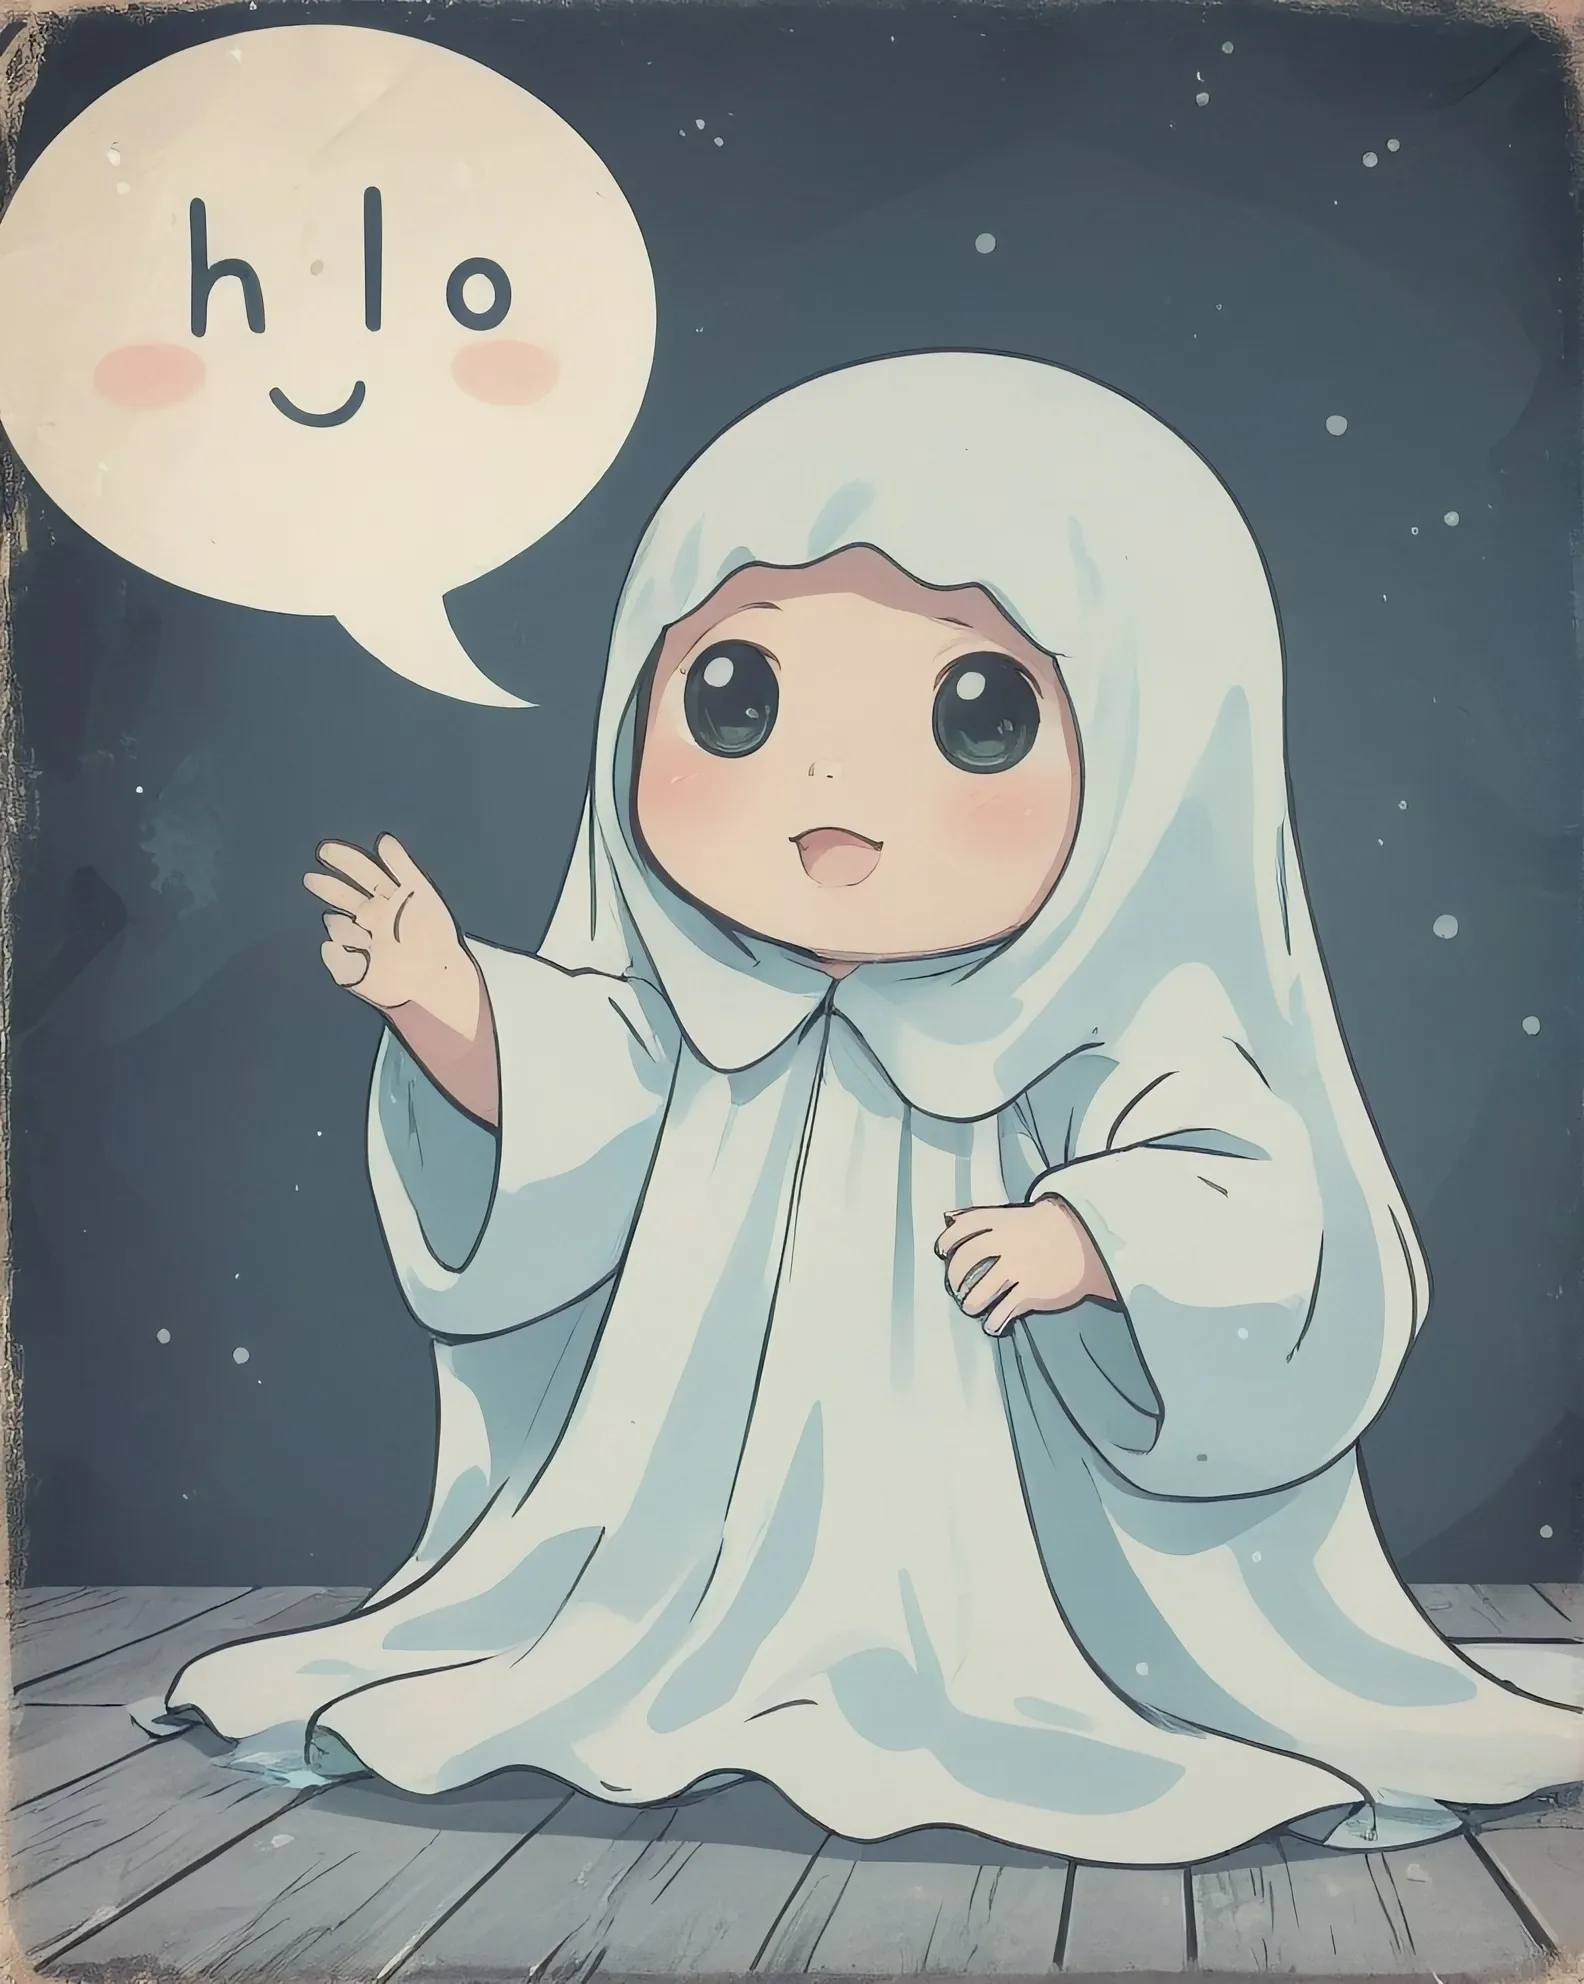 A cute baby sheet ghost with chat bubble saying ("Hello")